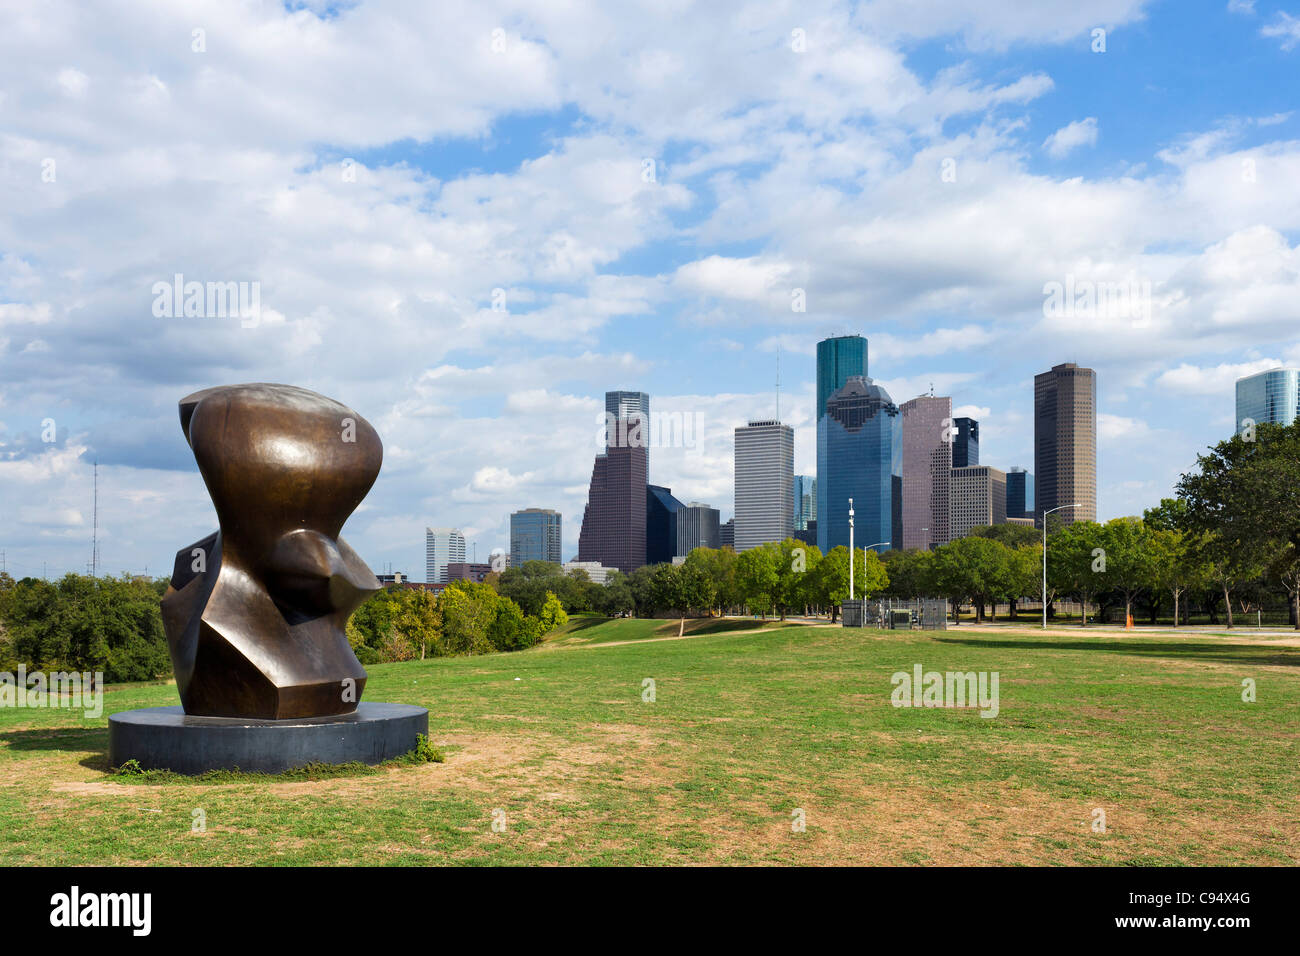 The city skyline with the Large Spindle Piece sculpture by Henry Moore in the foreground, Allen Parkway, Houston, Texas, USA Stock Photo